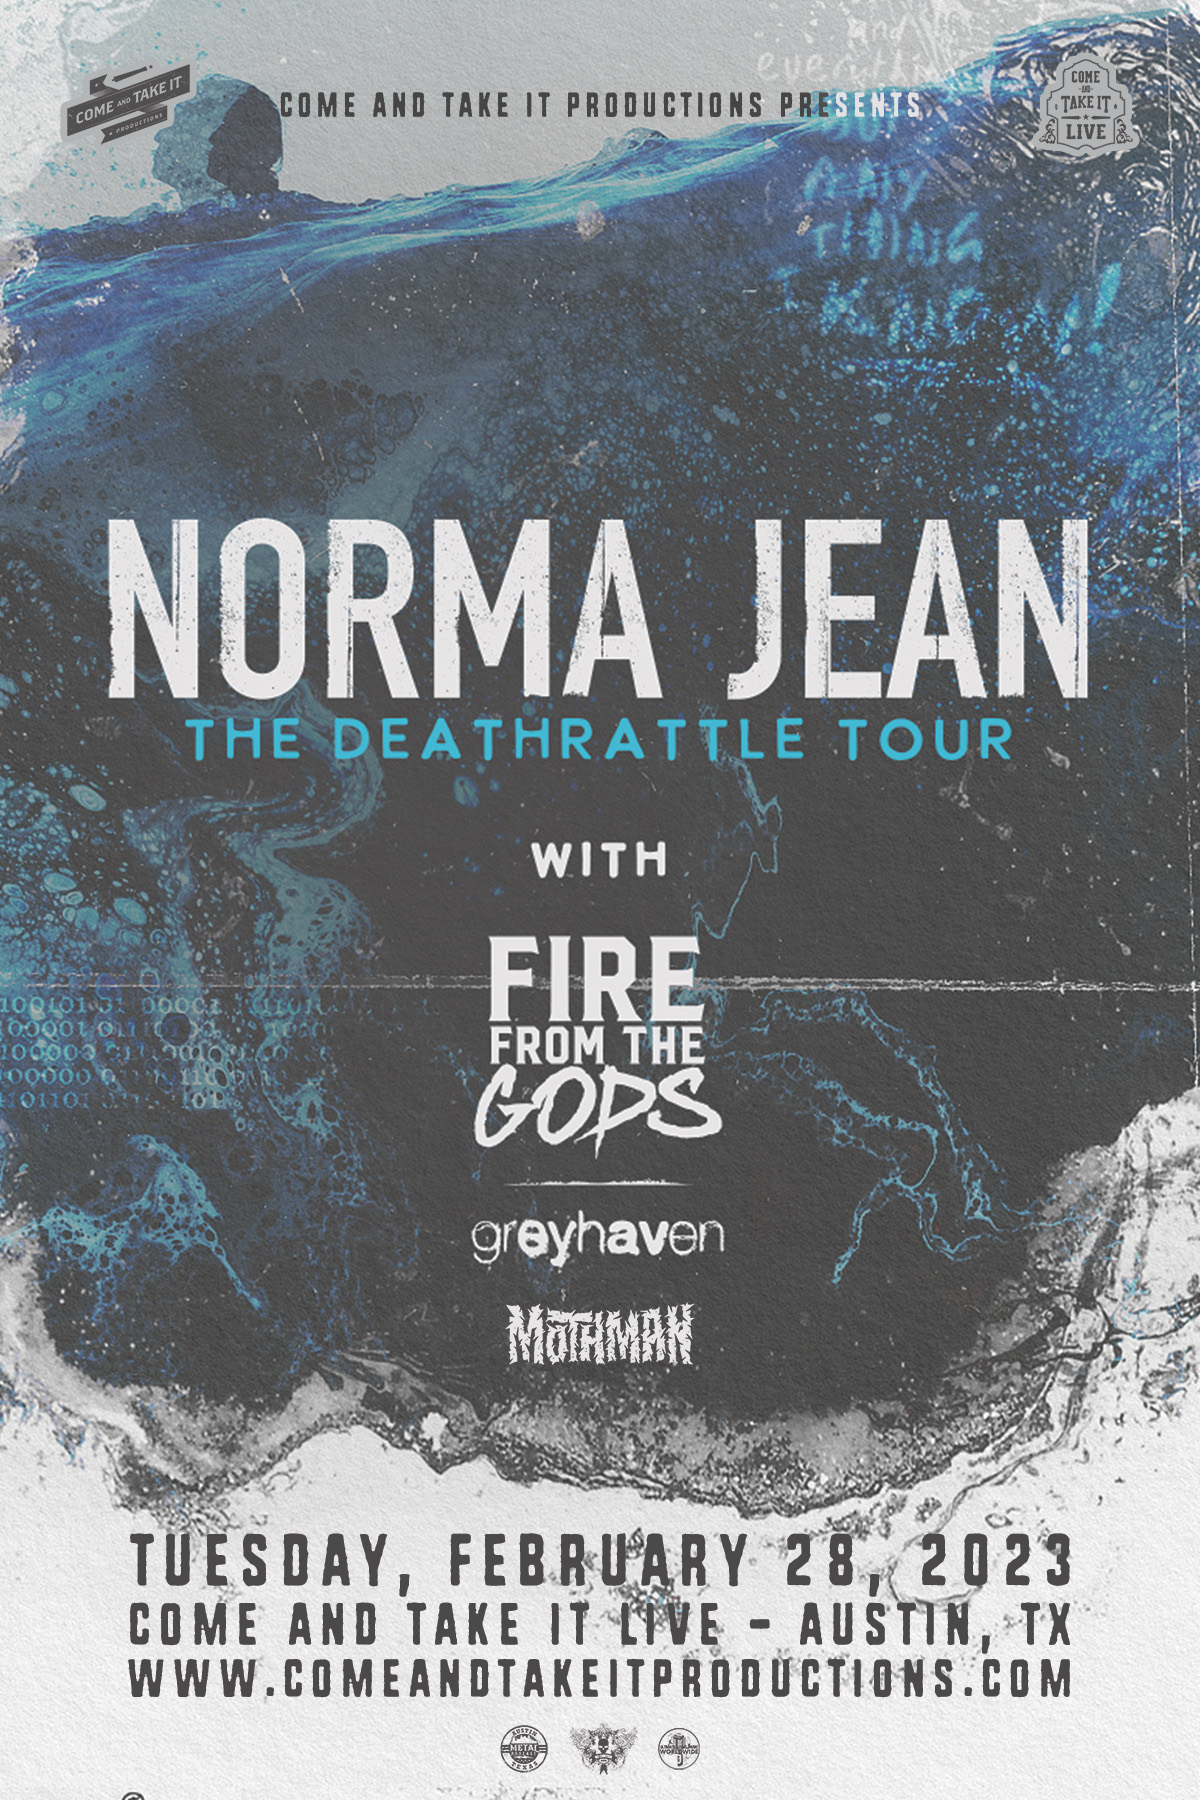 Norma Jean, Fire From The Gods, Greyhaven and Mothman